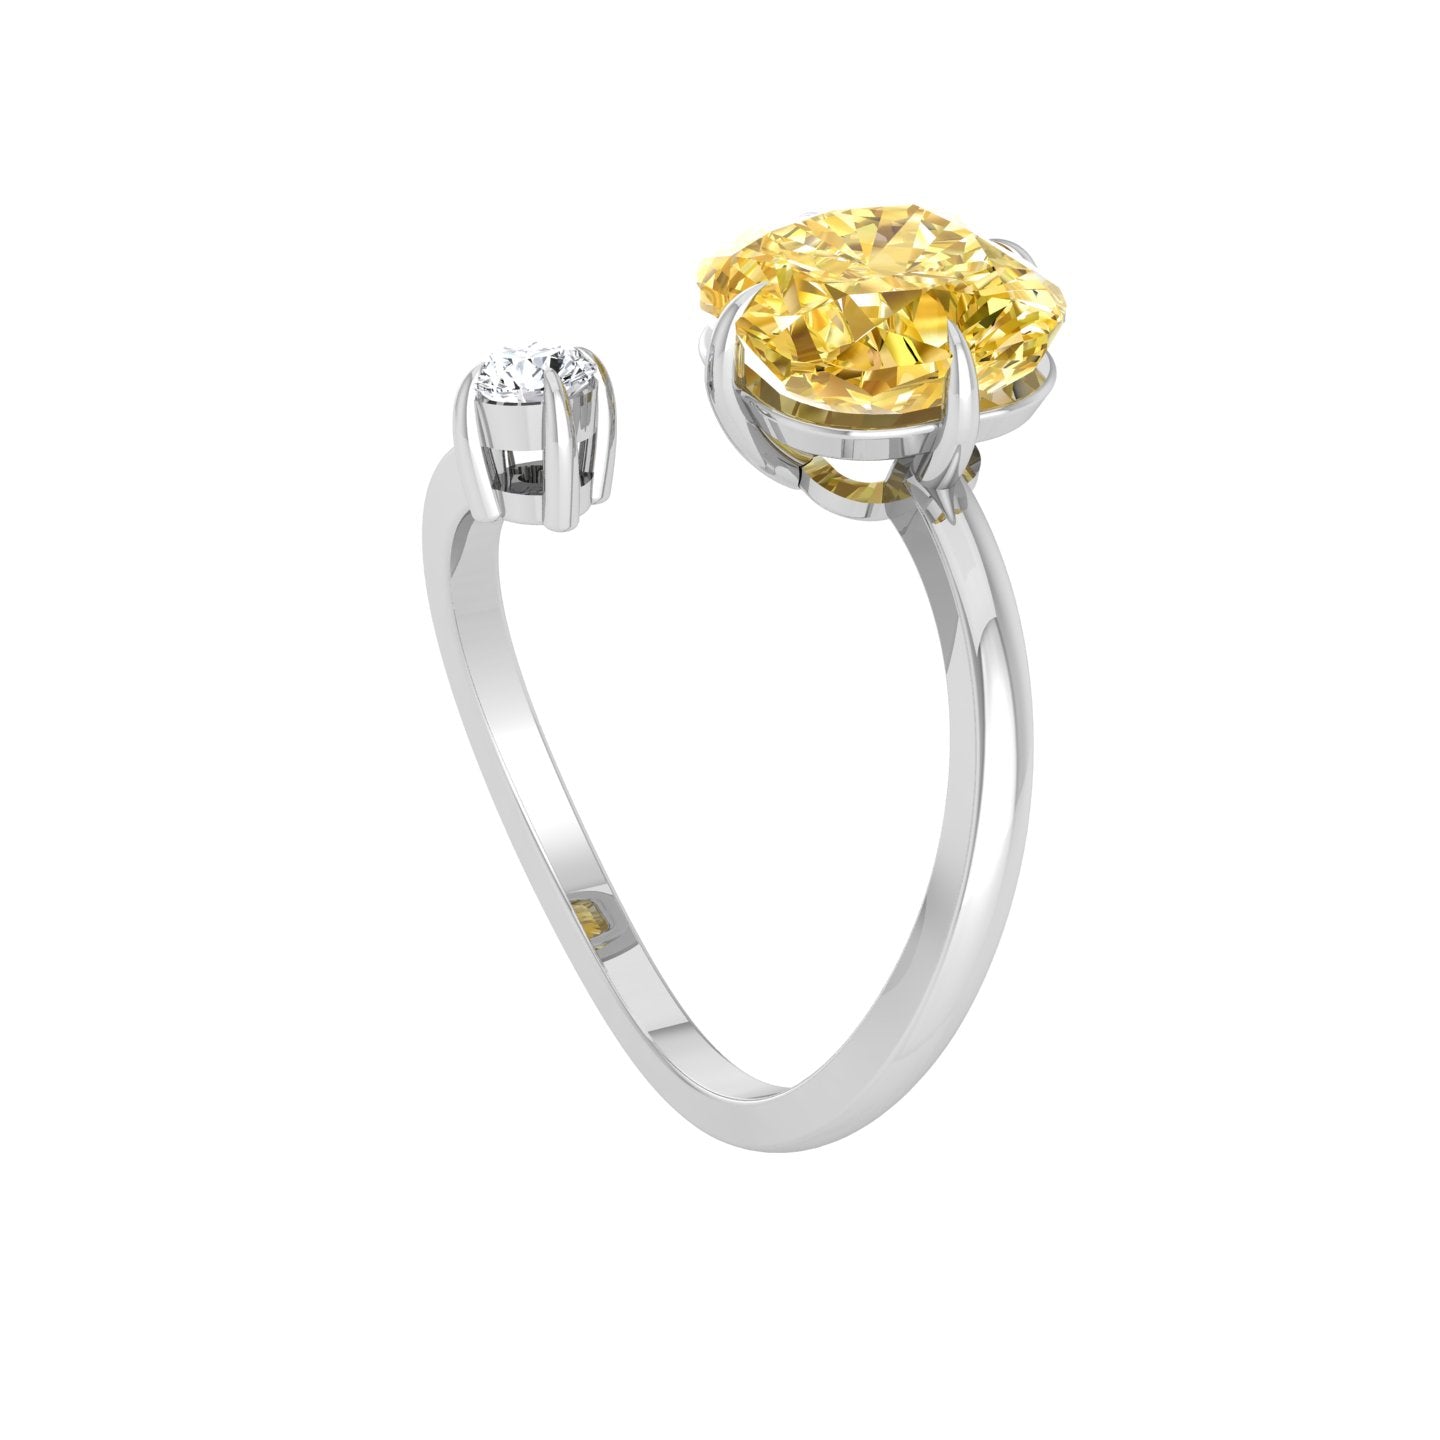 Ring With Yellow Stone and a Diamond